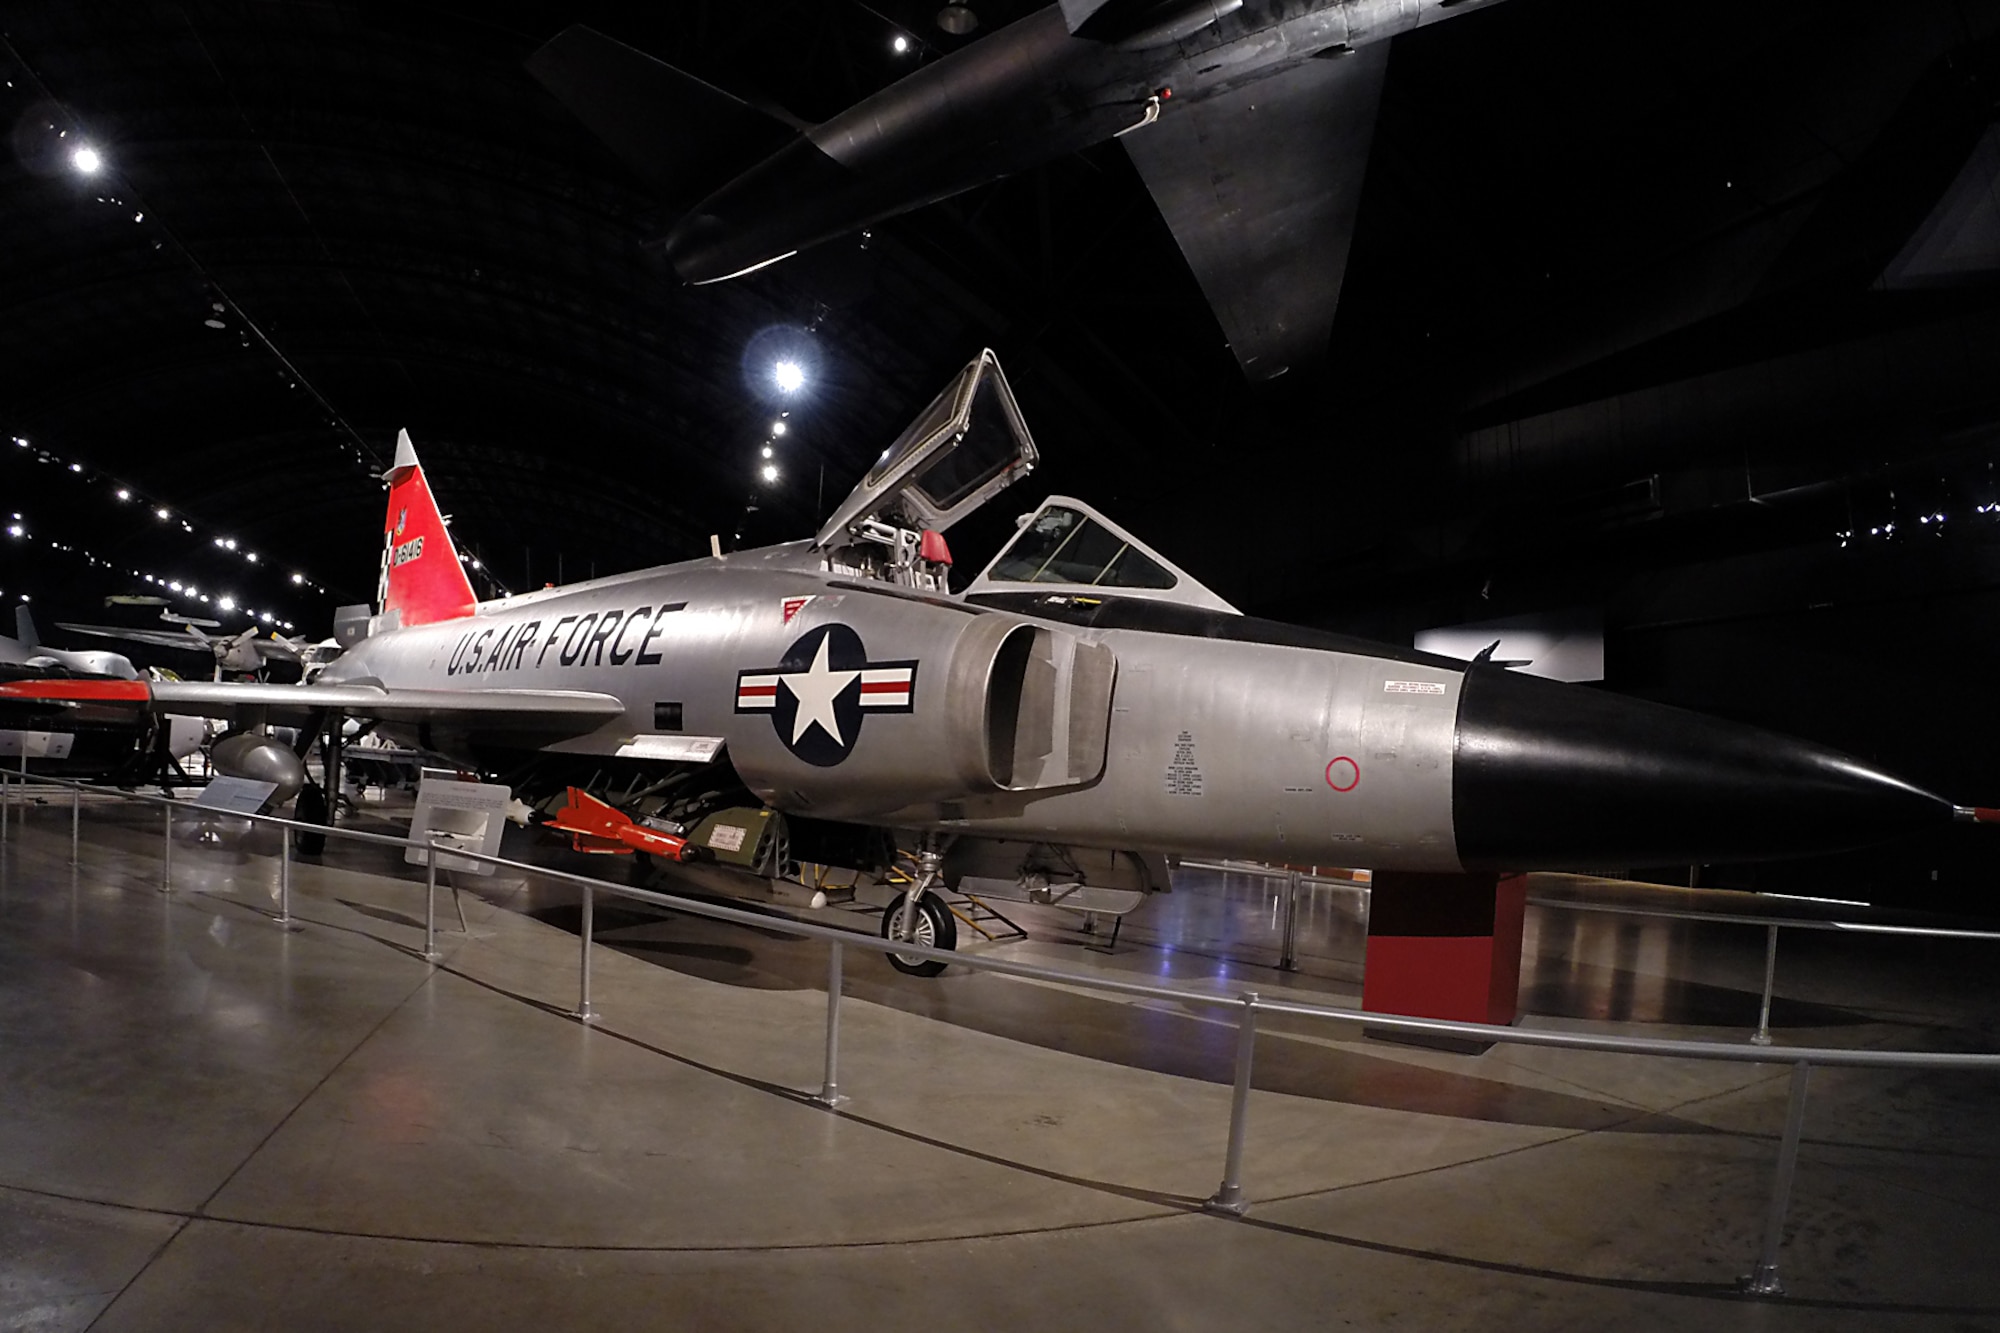 Convair F-102A Delta Dagger in the Cold War Gallery at the National Museum of the United States Air Force (U.S. Air Force photo)